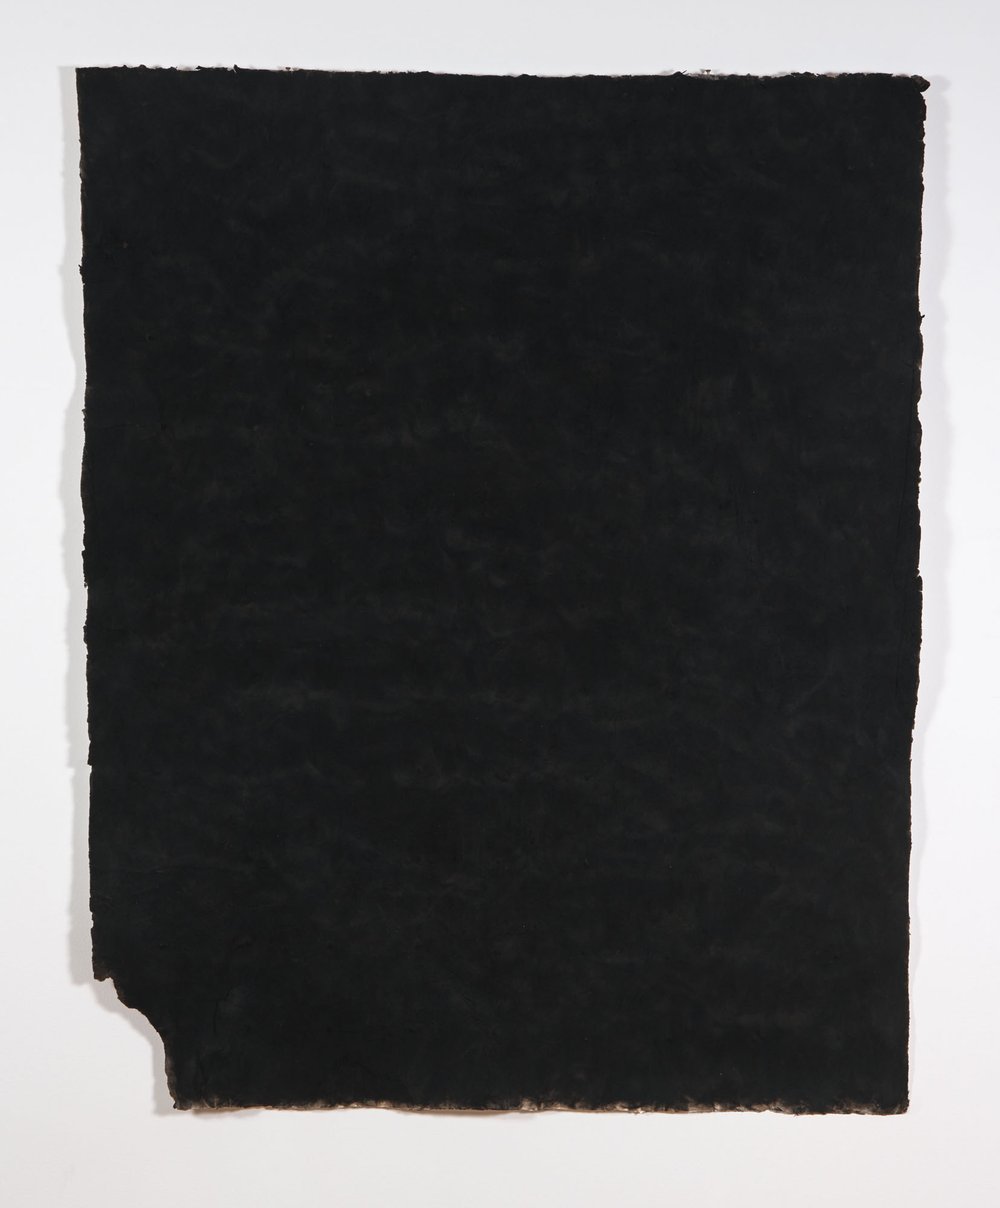   Christine Howard Sandoval    Ignition Pattern 2: Victory Over the Sun (for Malevich) , 2023 Soot, bear grass seeds, handmade paper 59 × 48 inches 